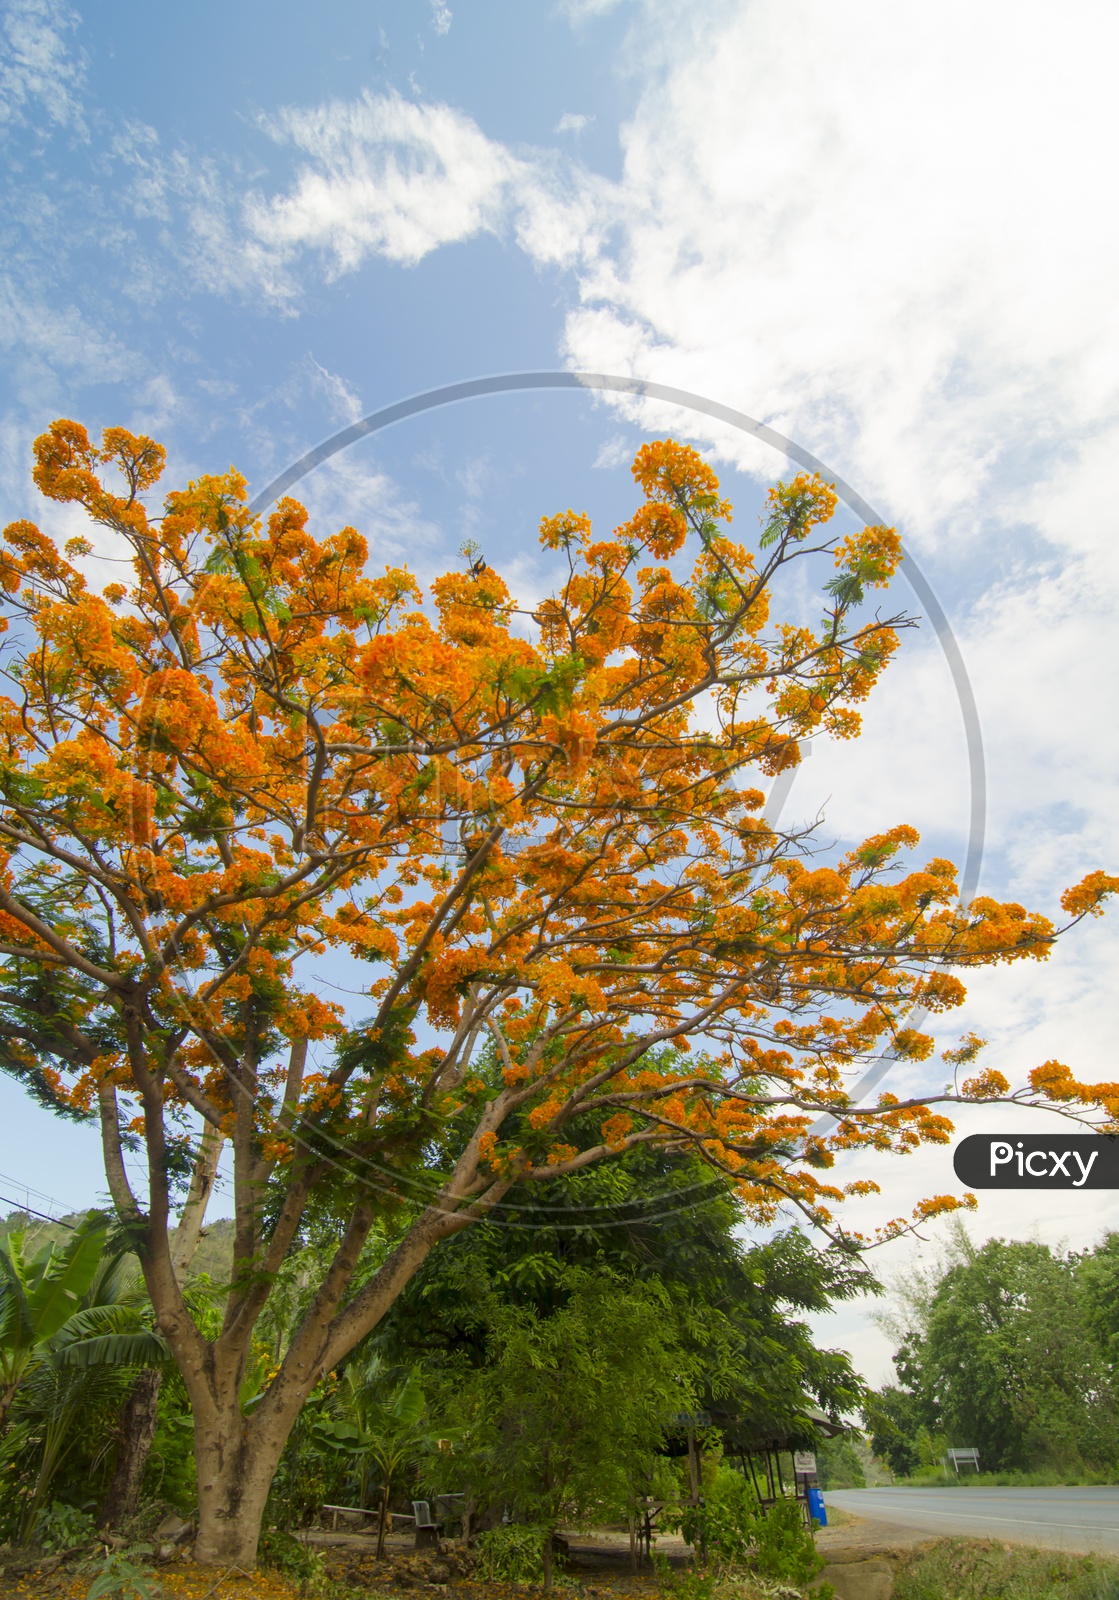 Delonix regia or Royal Poinciana Tree  or Peacock Flowers On tree With Blue Sky Background